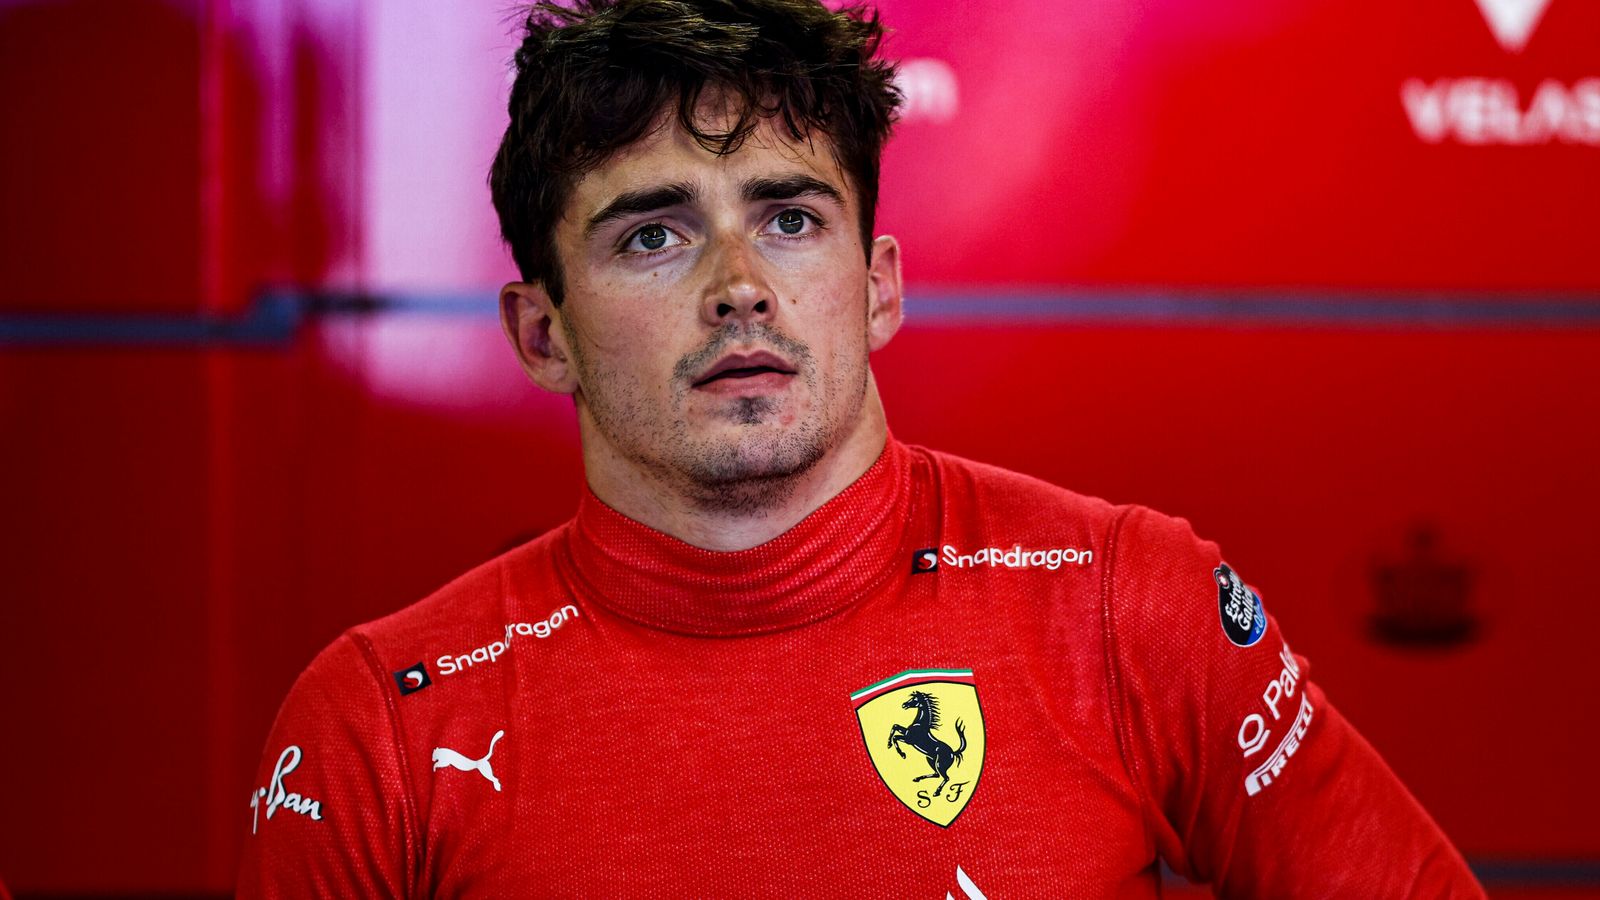 Charles Leclerc slams Ferrari mistakes at Monaco GP: ‘We cannot do that… it hurts a lot’